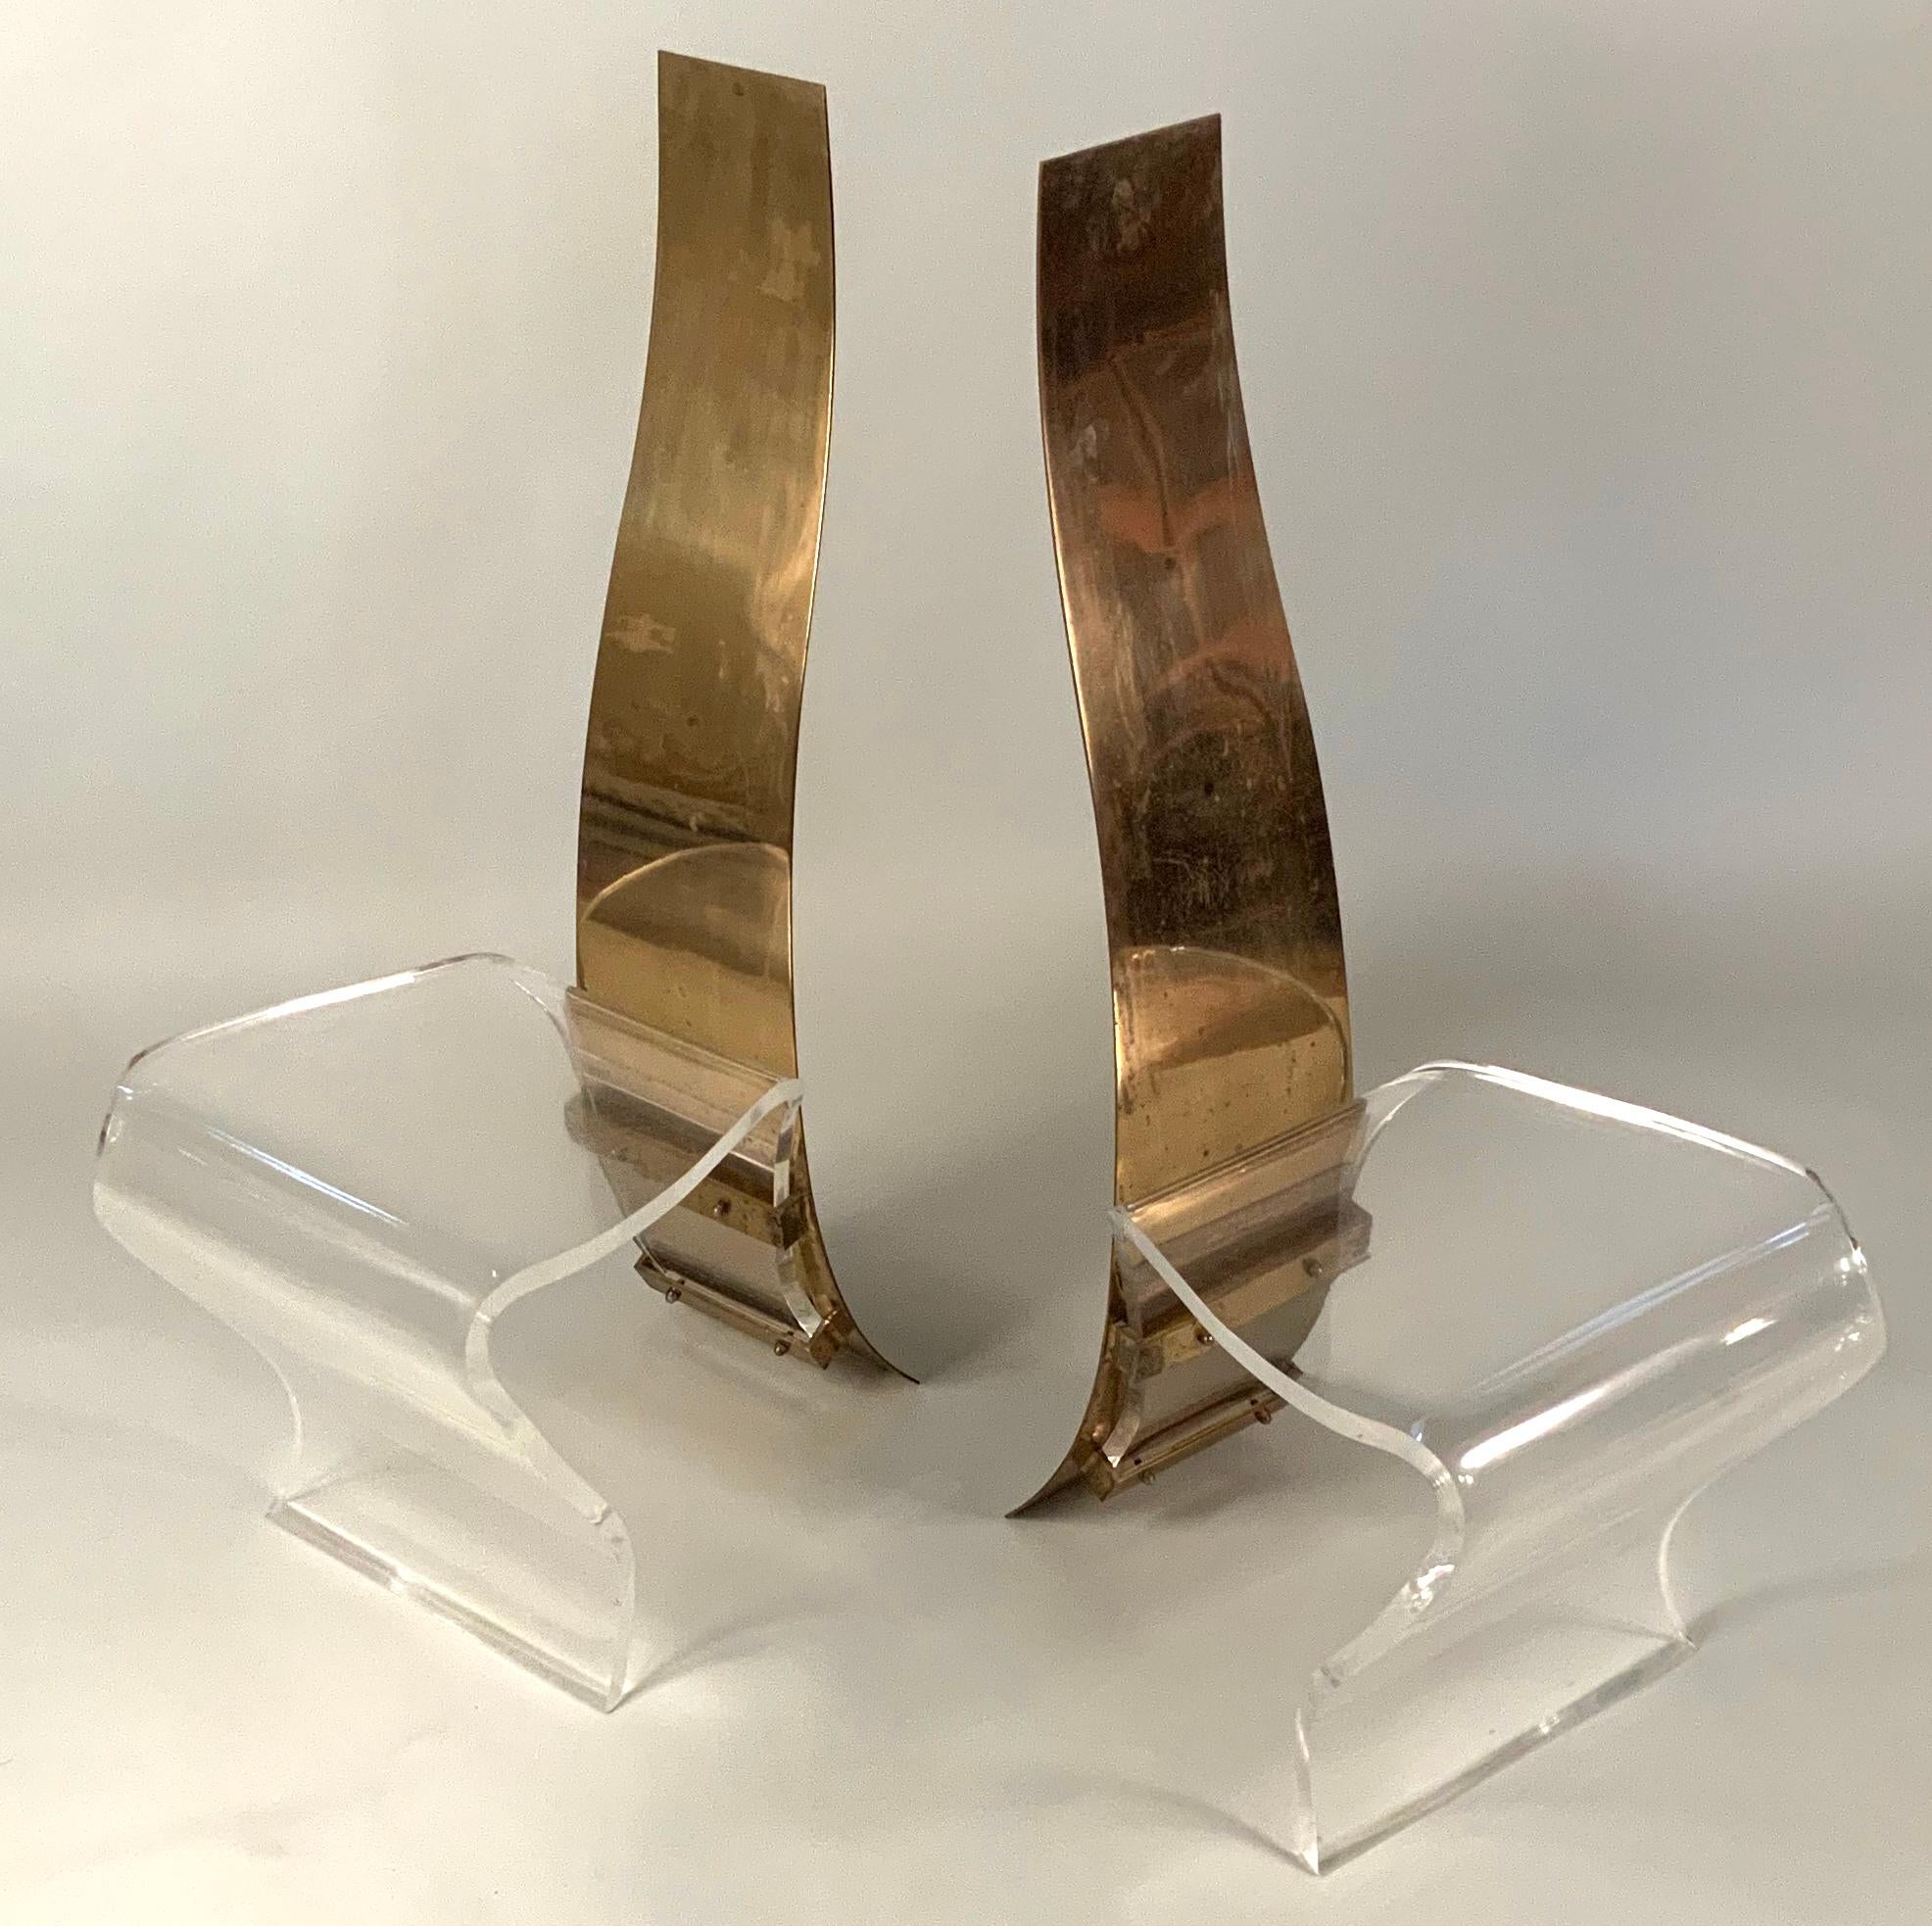 A very well made pair of vintage 1970s side chairs with frames in curved brass with polished stainless curved spines. The seats in very thick and substantial curved Lucite. Wonderful design and scale and proportions, and very comfortable. The